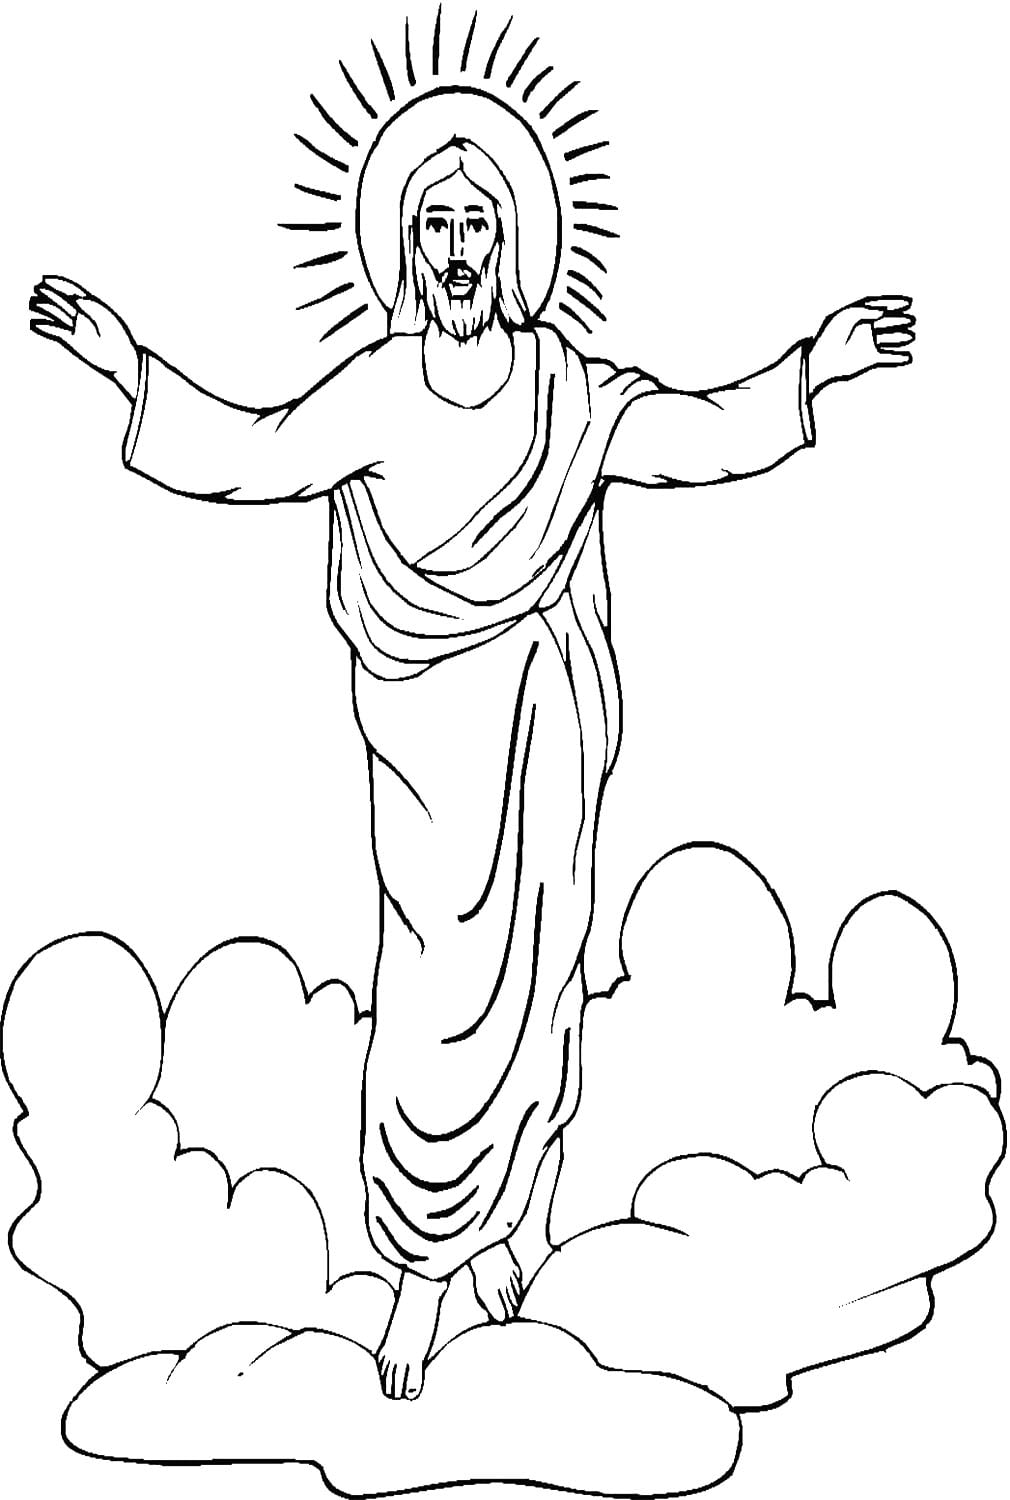 Resurrection Of Jesus Coloring Page - Free Printable Coloring Pages